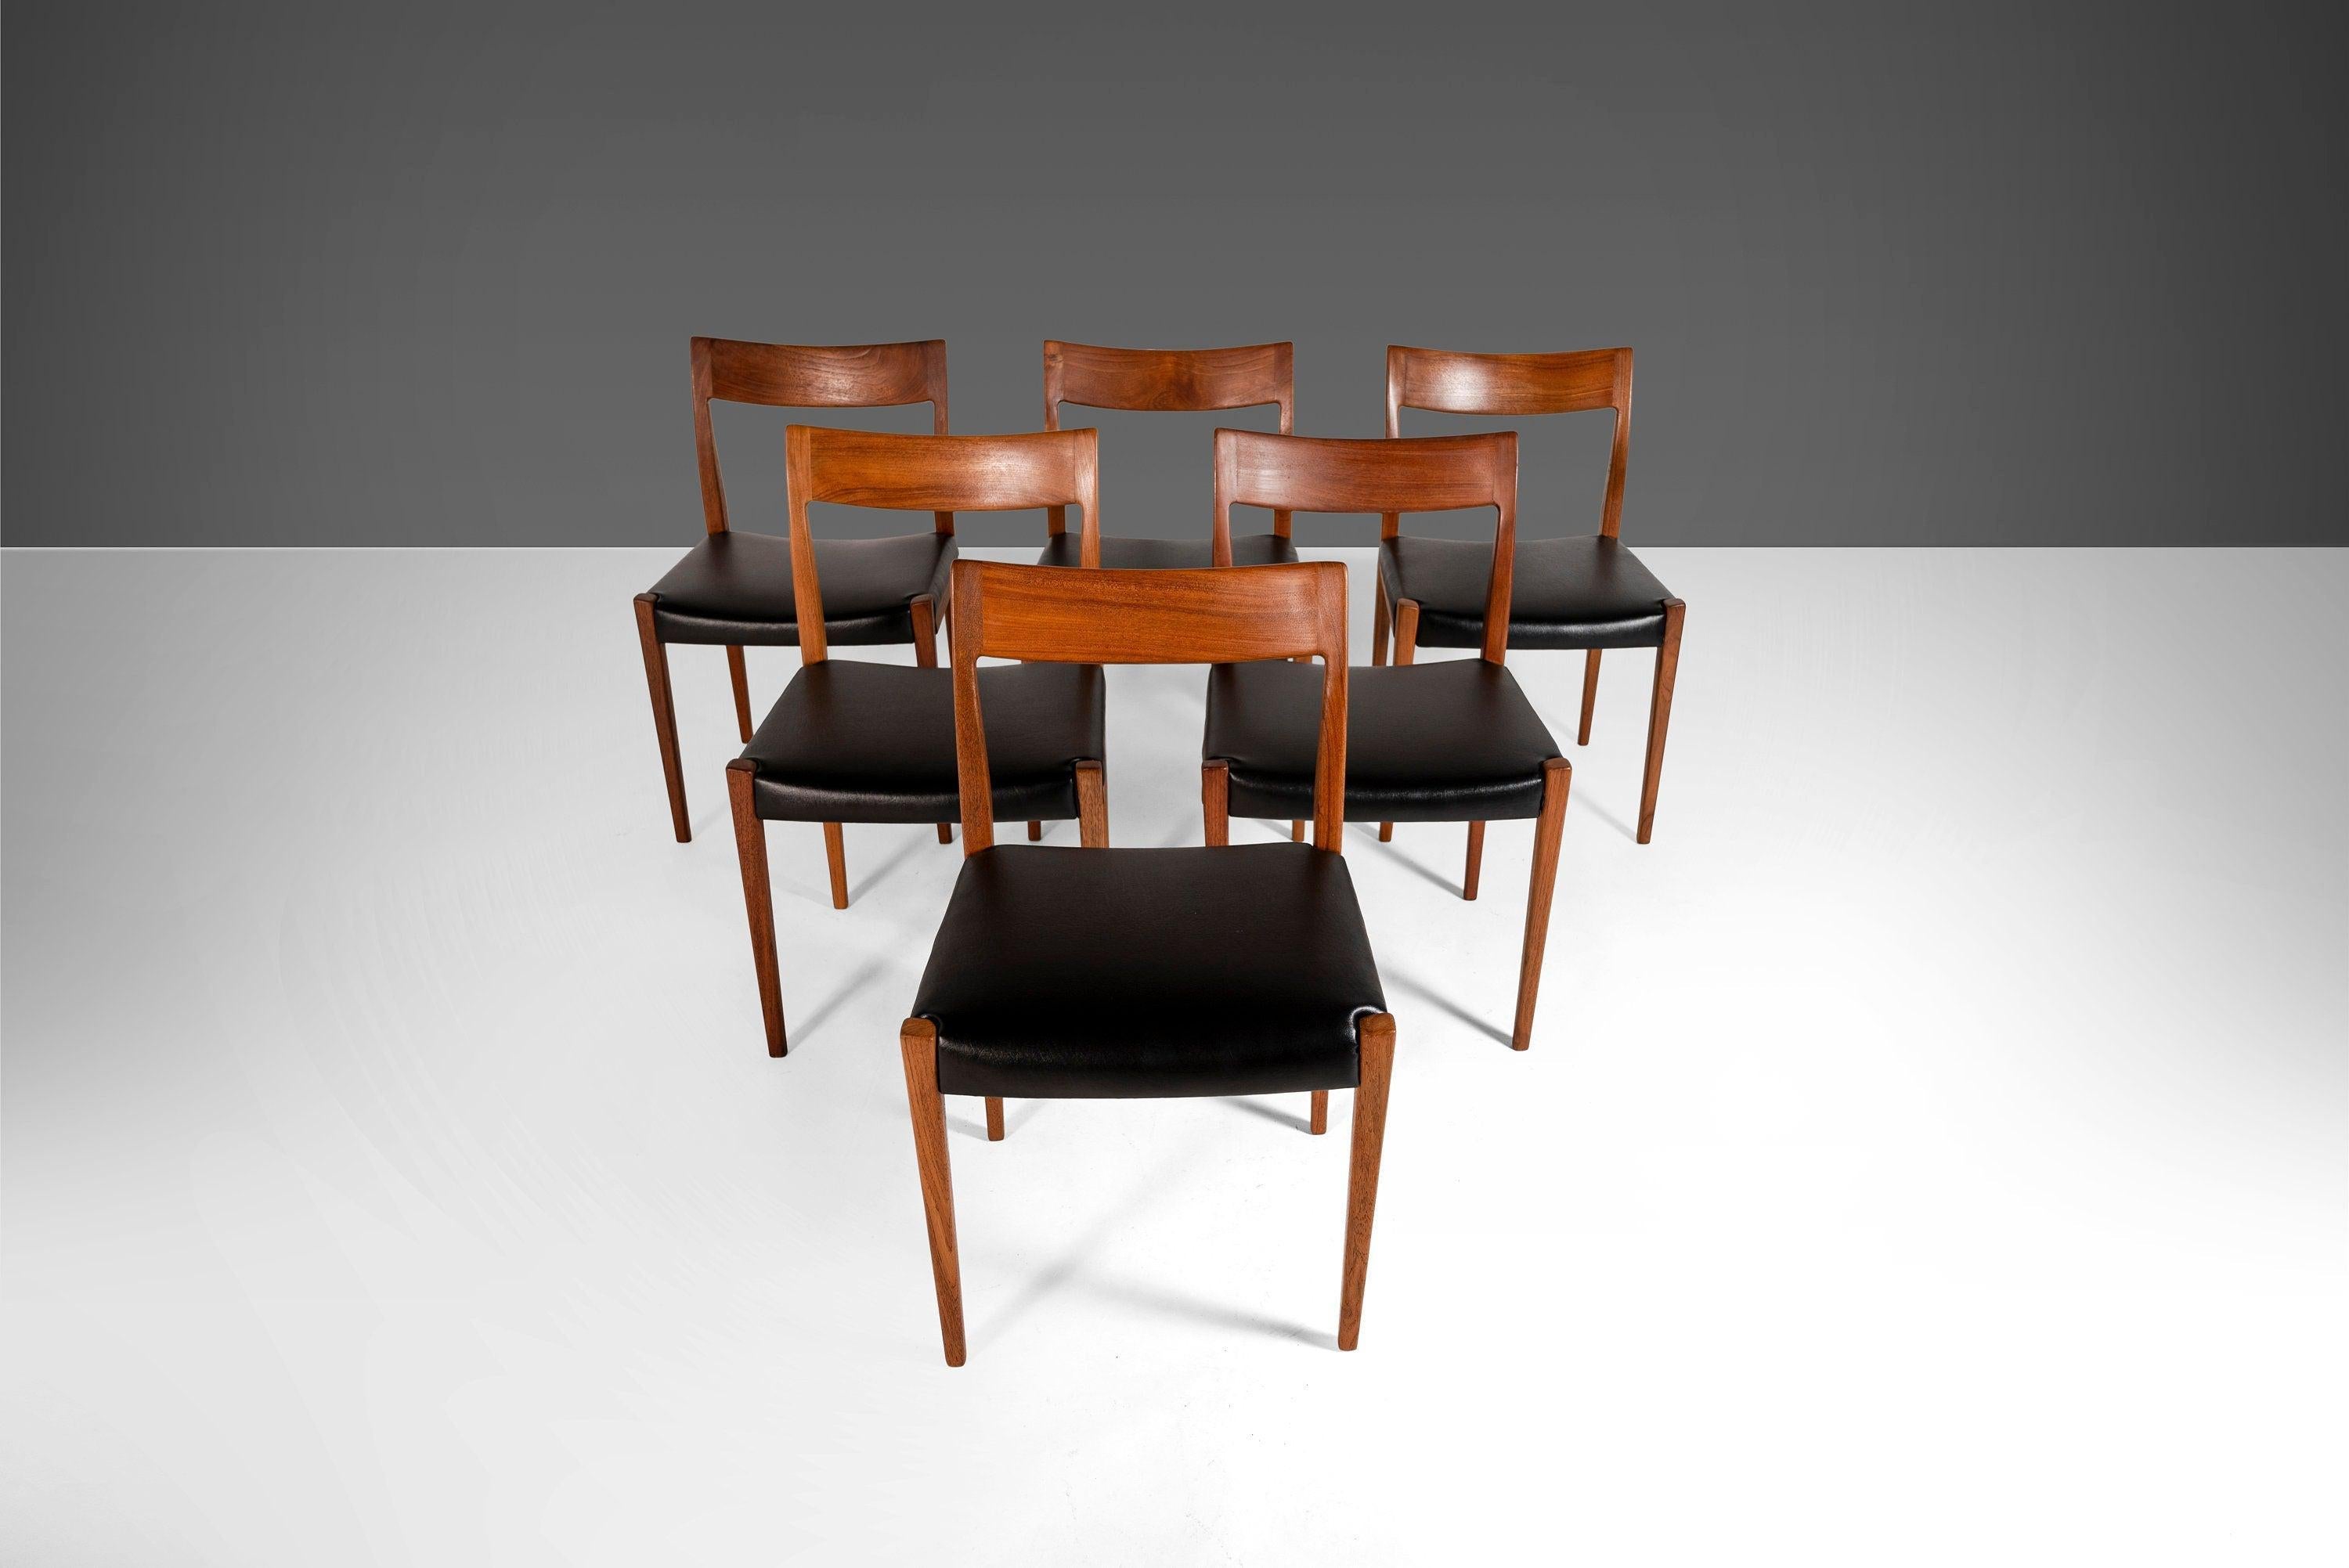 Constructed from teak with lines reminiscent of the Model 57 and Model 77 chairs designed by Neils Moller. The Kontiki side chair proved to be one of Ekstrom's most beloved designs not only for Troeds but throughout the design community. This set is